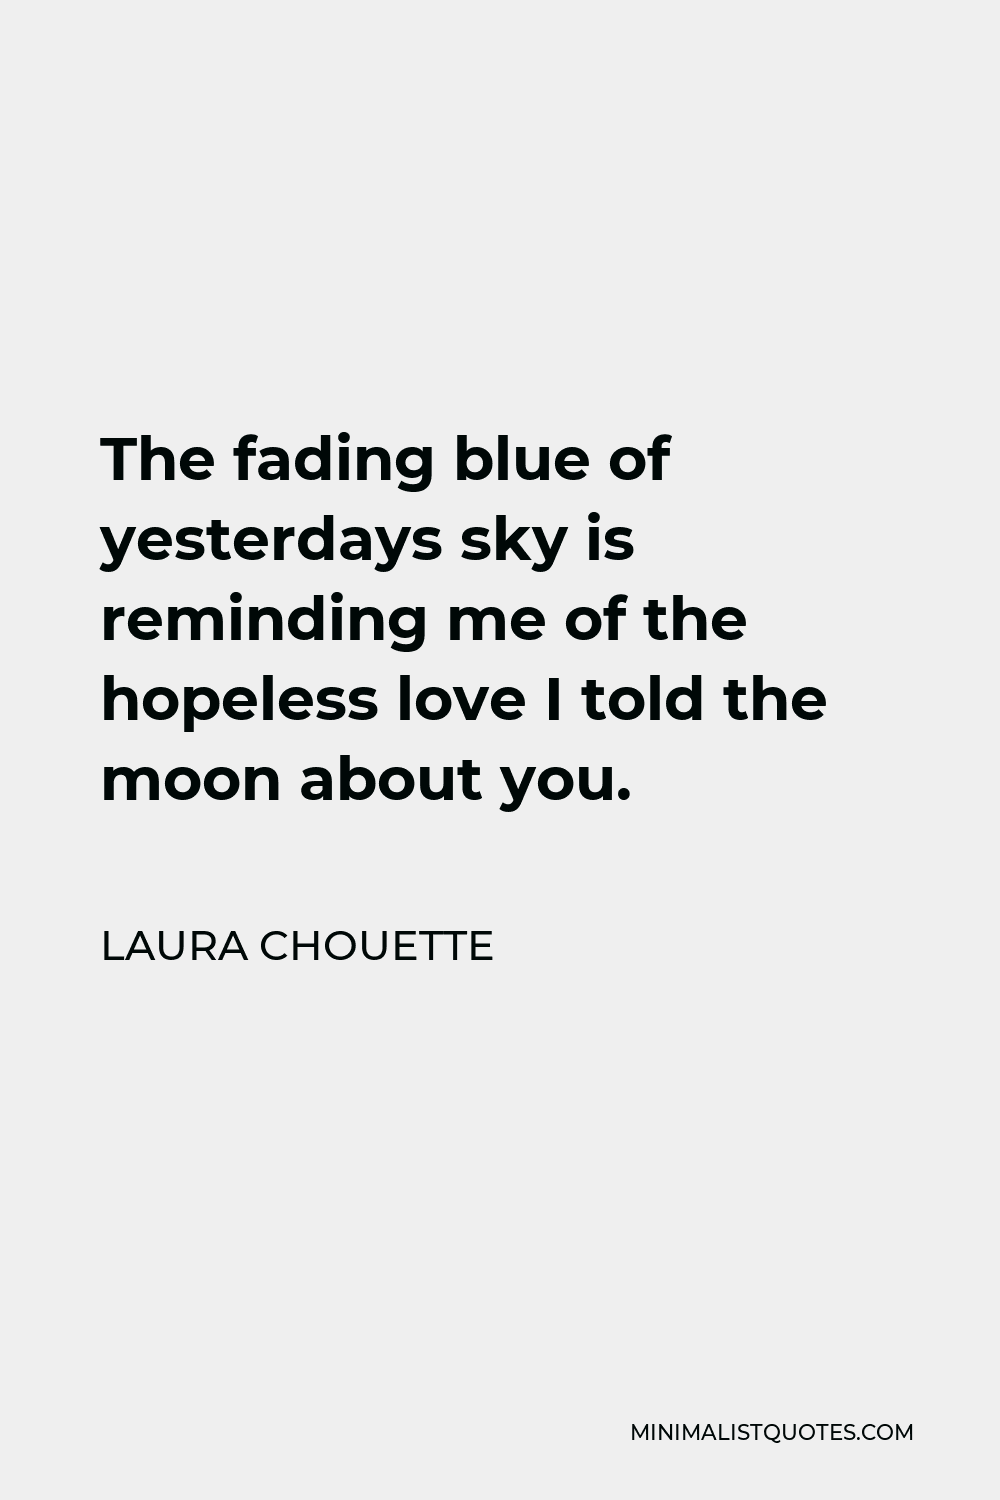 Laura Chouette Quote - The fading blue of yesterdays sky is reminding me of the hopeless love I told the moon about you.